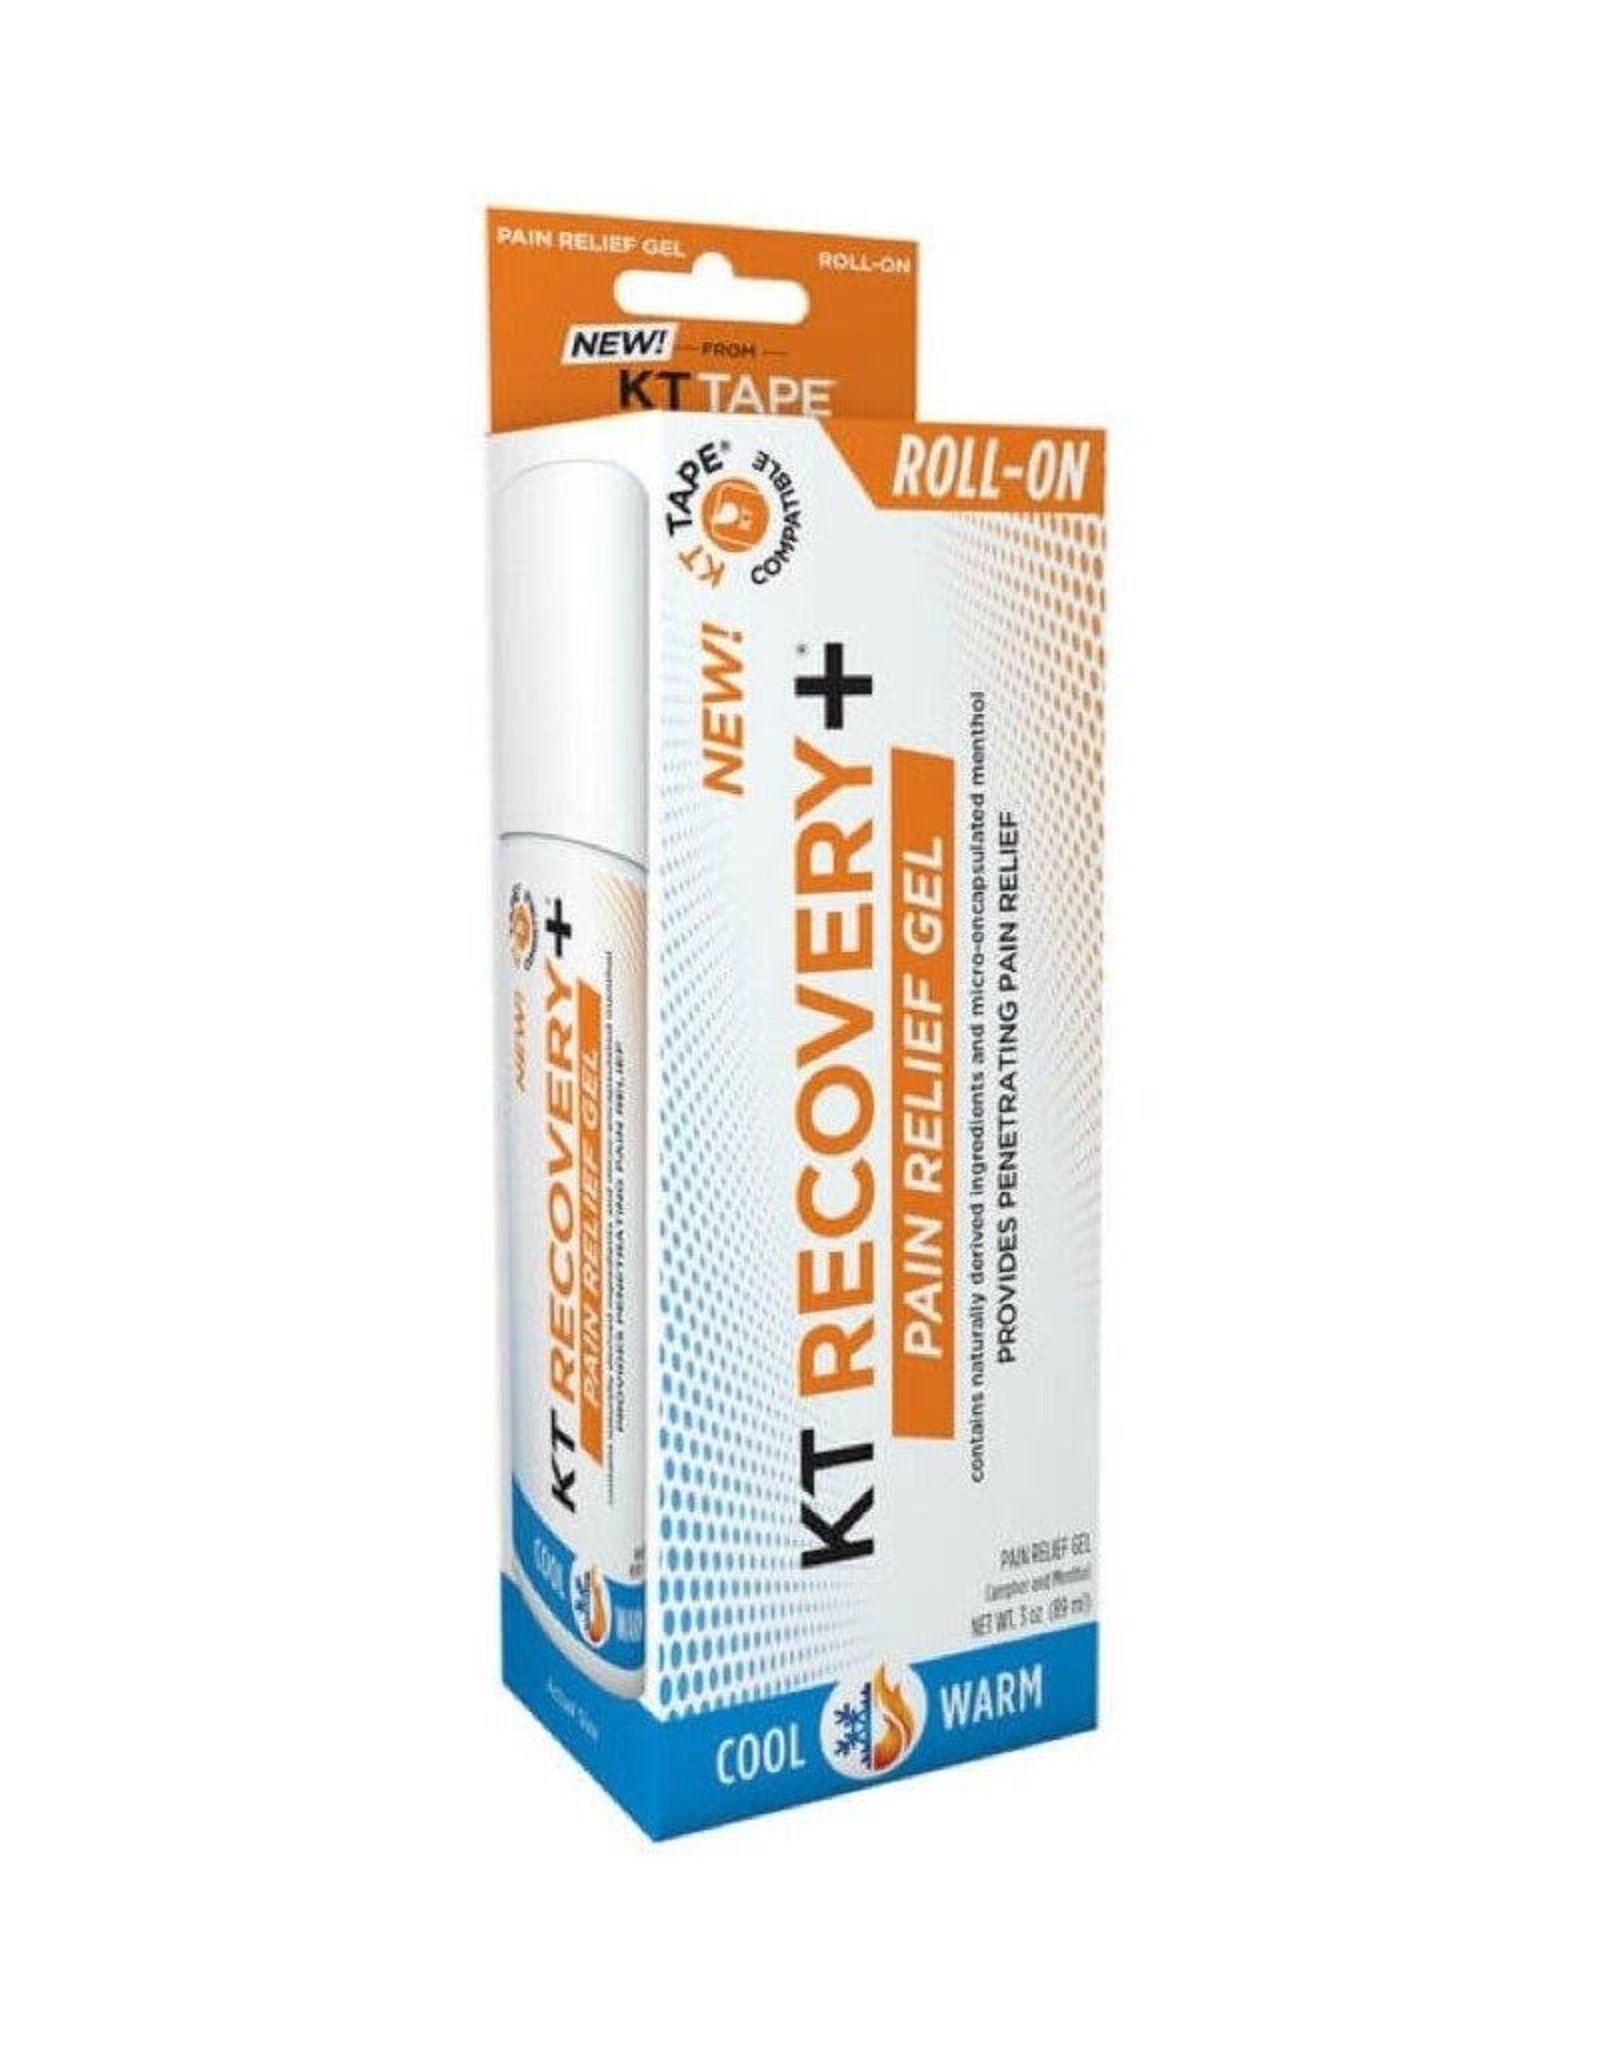 KT TAPE Pain Relief Gel Roll On